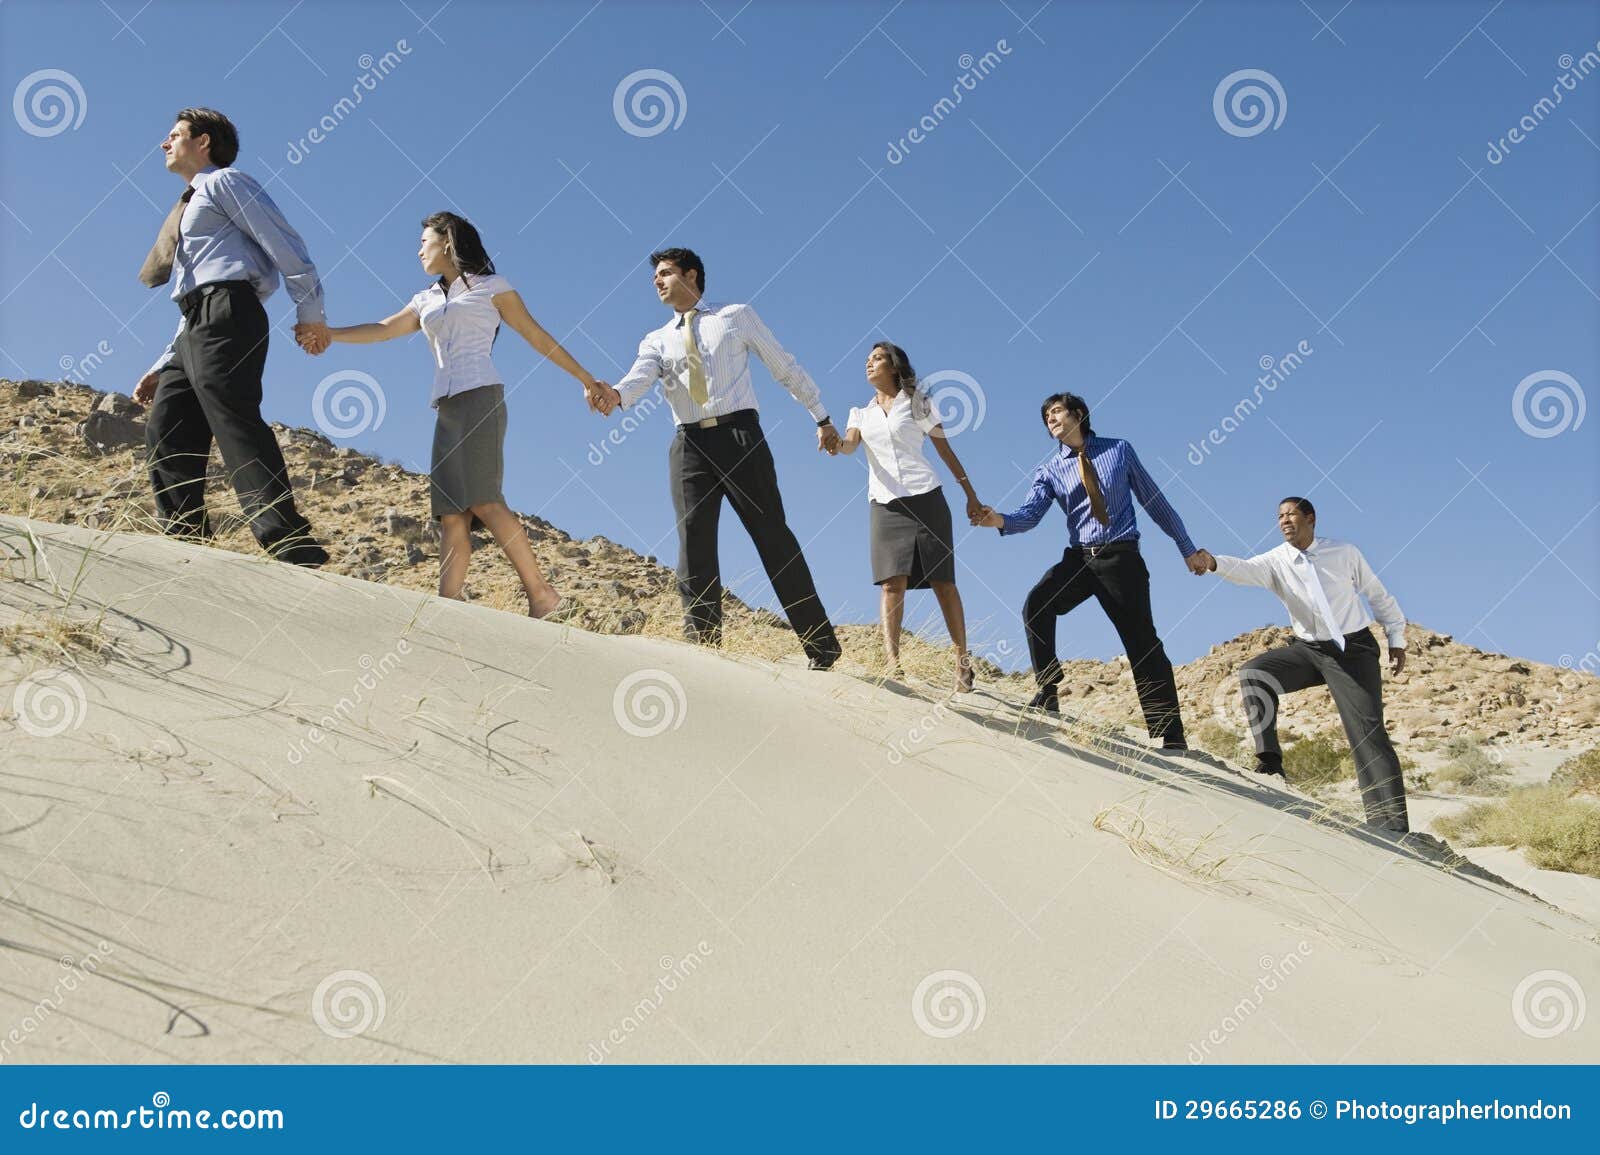 businesspeople holding hands and walking uphill